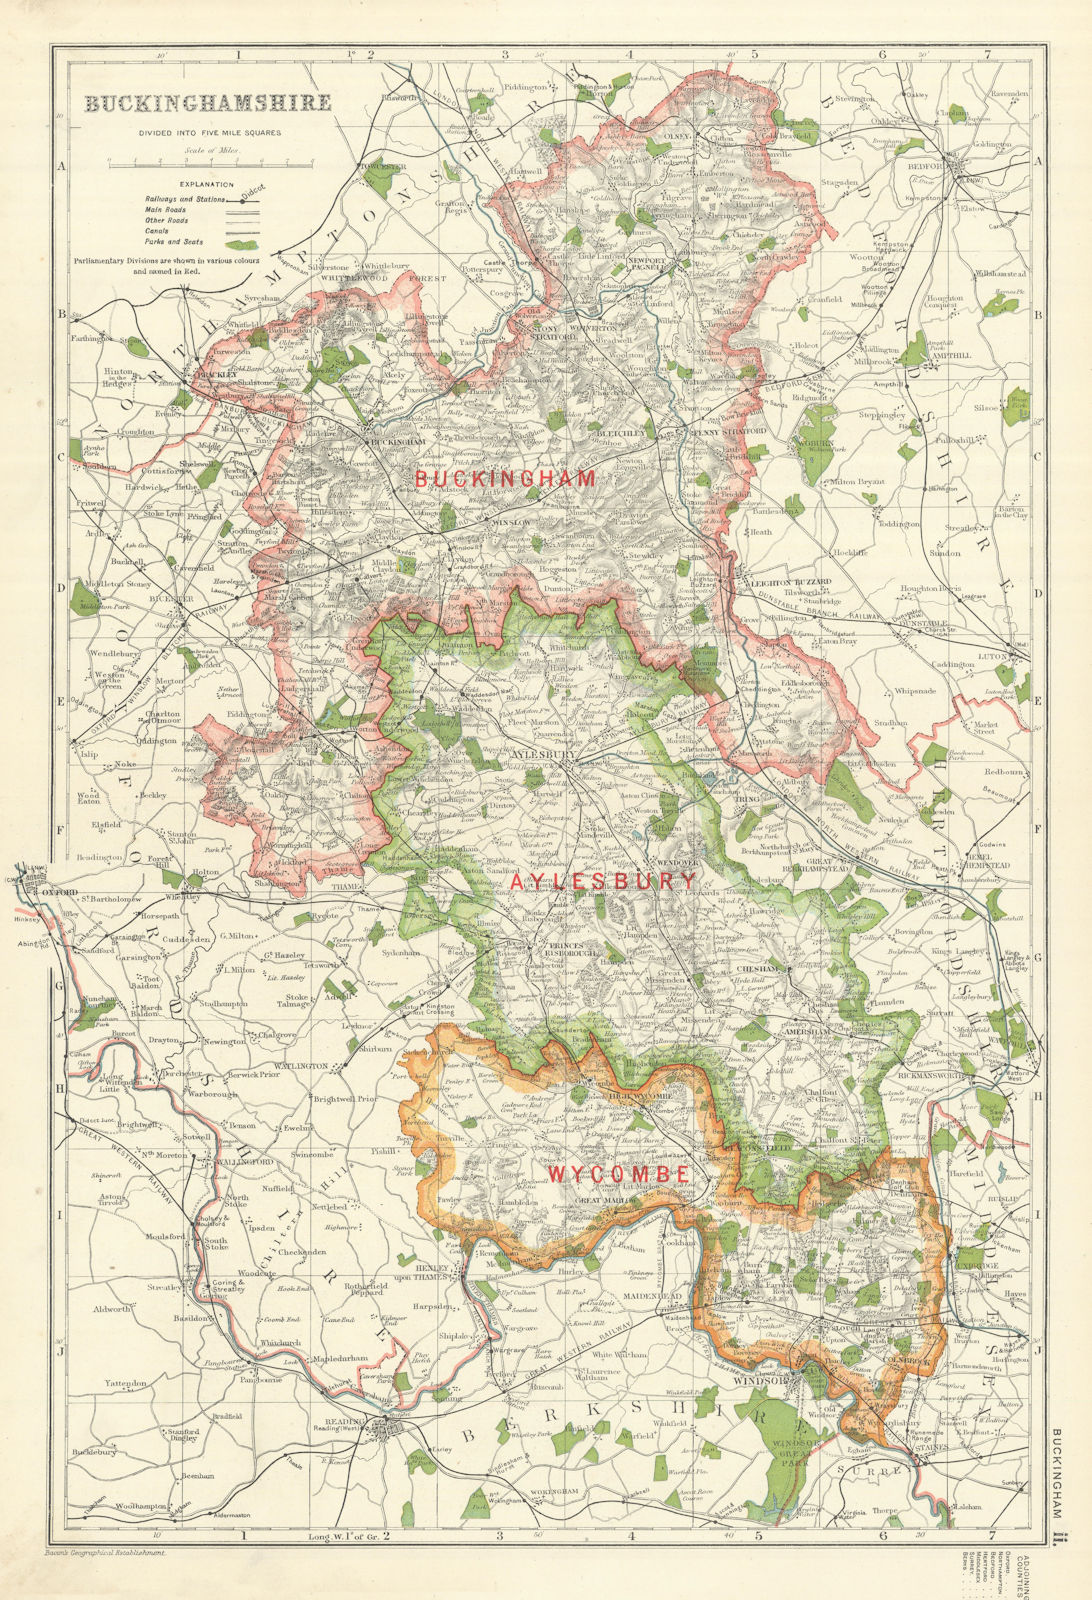 BUCKINGHAMSHIRE. Showing Parliamentary divisions,boroughs & parks.BACON 1919 map